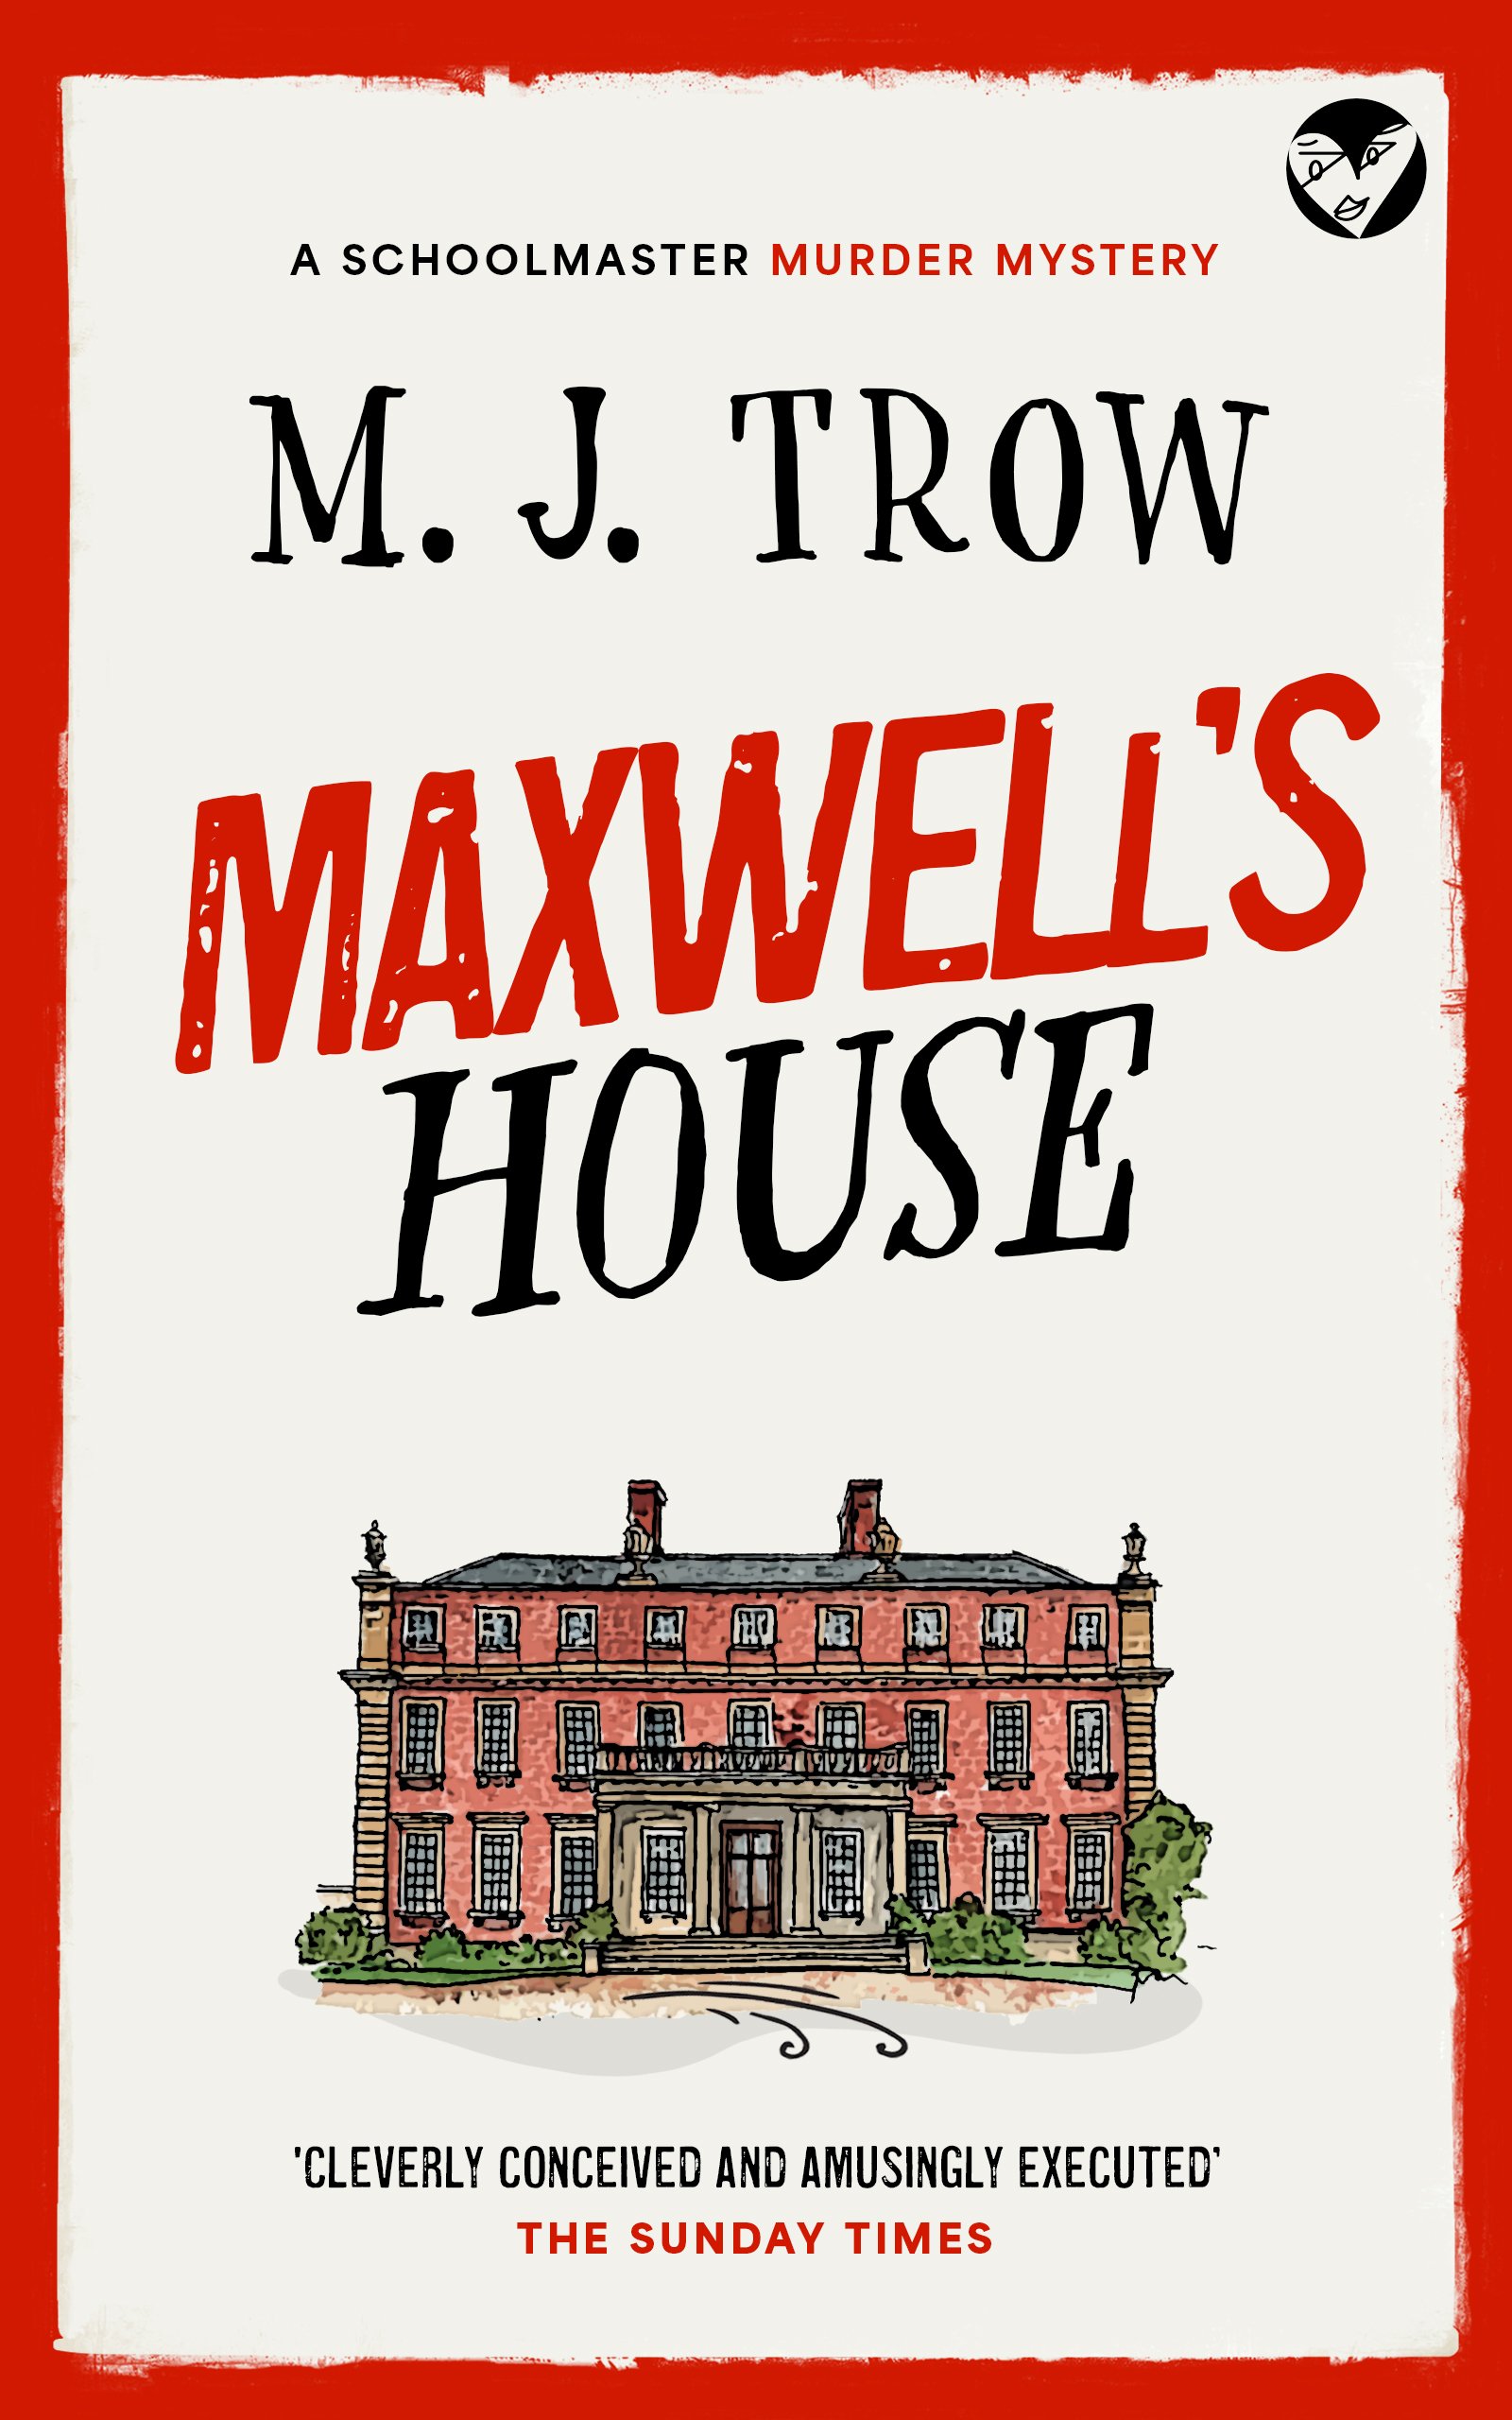 MAXWELL'S HOUSE Cover publish.jpg